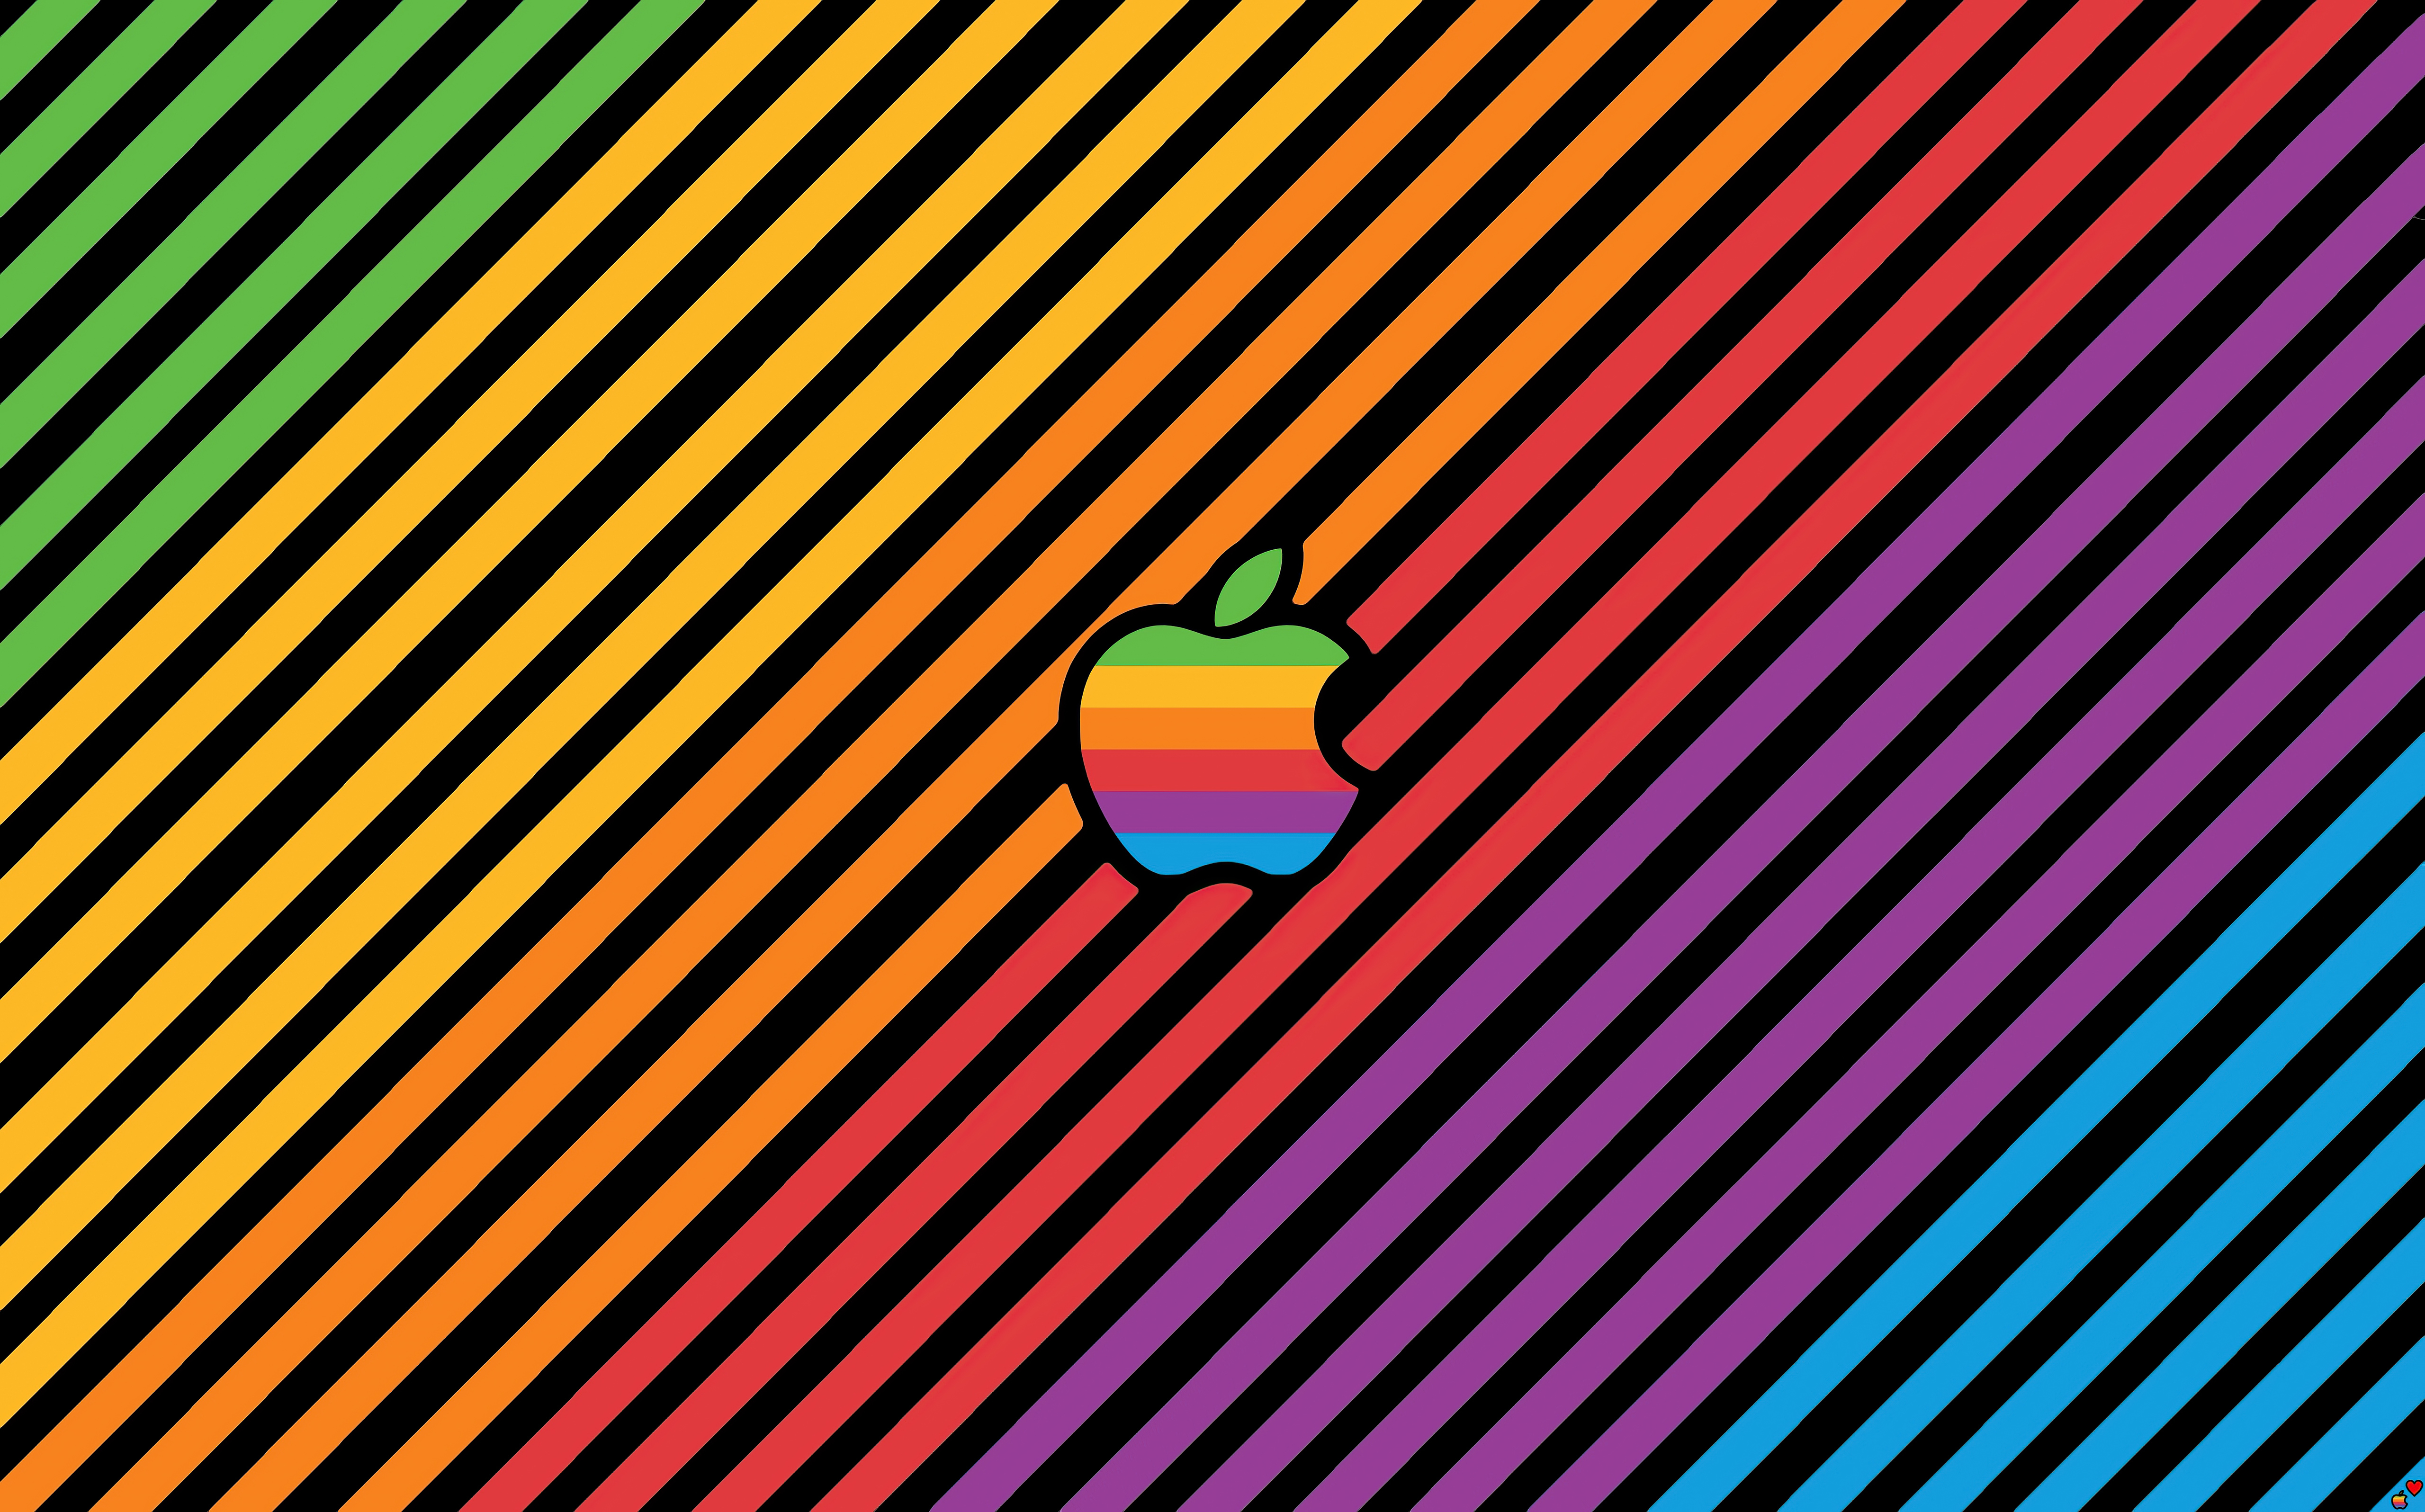 85 Free Apple iPad Wallpapers Featuring The Apple Logo | Apple ipad  wallpaper, Ipad wallpaper, Apple wallpaper